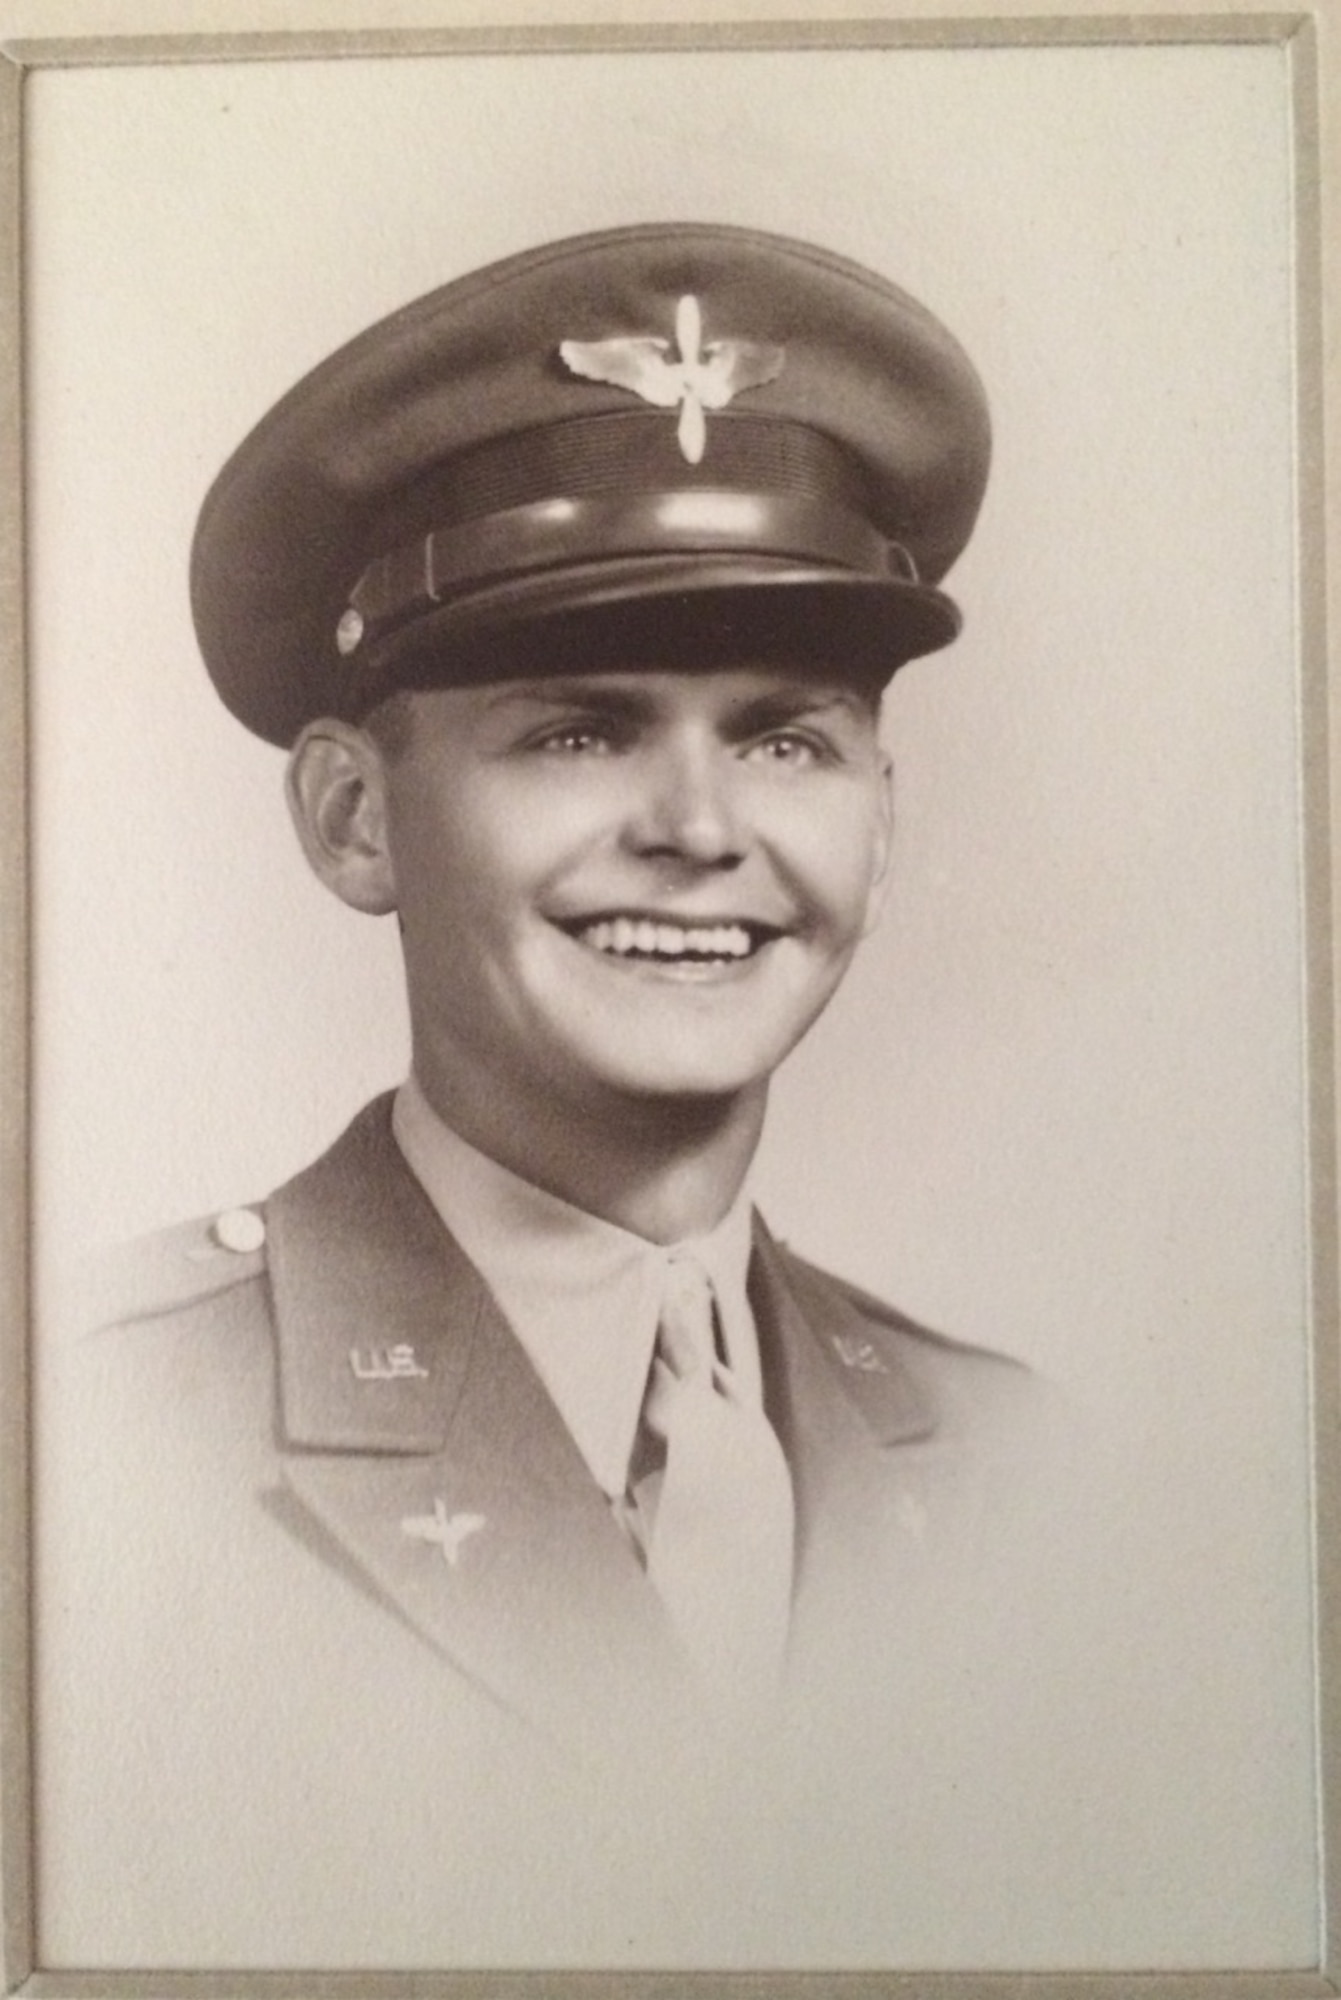 The remains of U.S. Army Air Corps 1st Lt. Robert L. McIntosh were recently found after more than 72 years after his disappearance and were laid to rest in his hometown of Tipton, Indiana, Aug. 13, 2016. In 1944, the 27th Fighter Squadron P-38 Lightning pilot  departed Foggia Airfield, Italy, on a strafing mission and never returned.